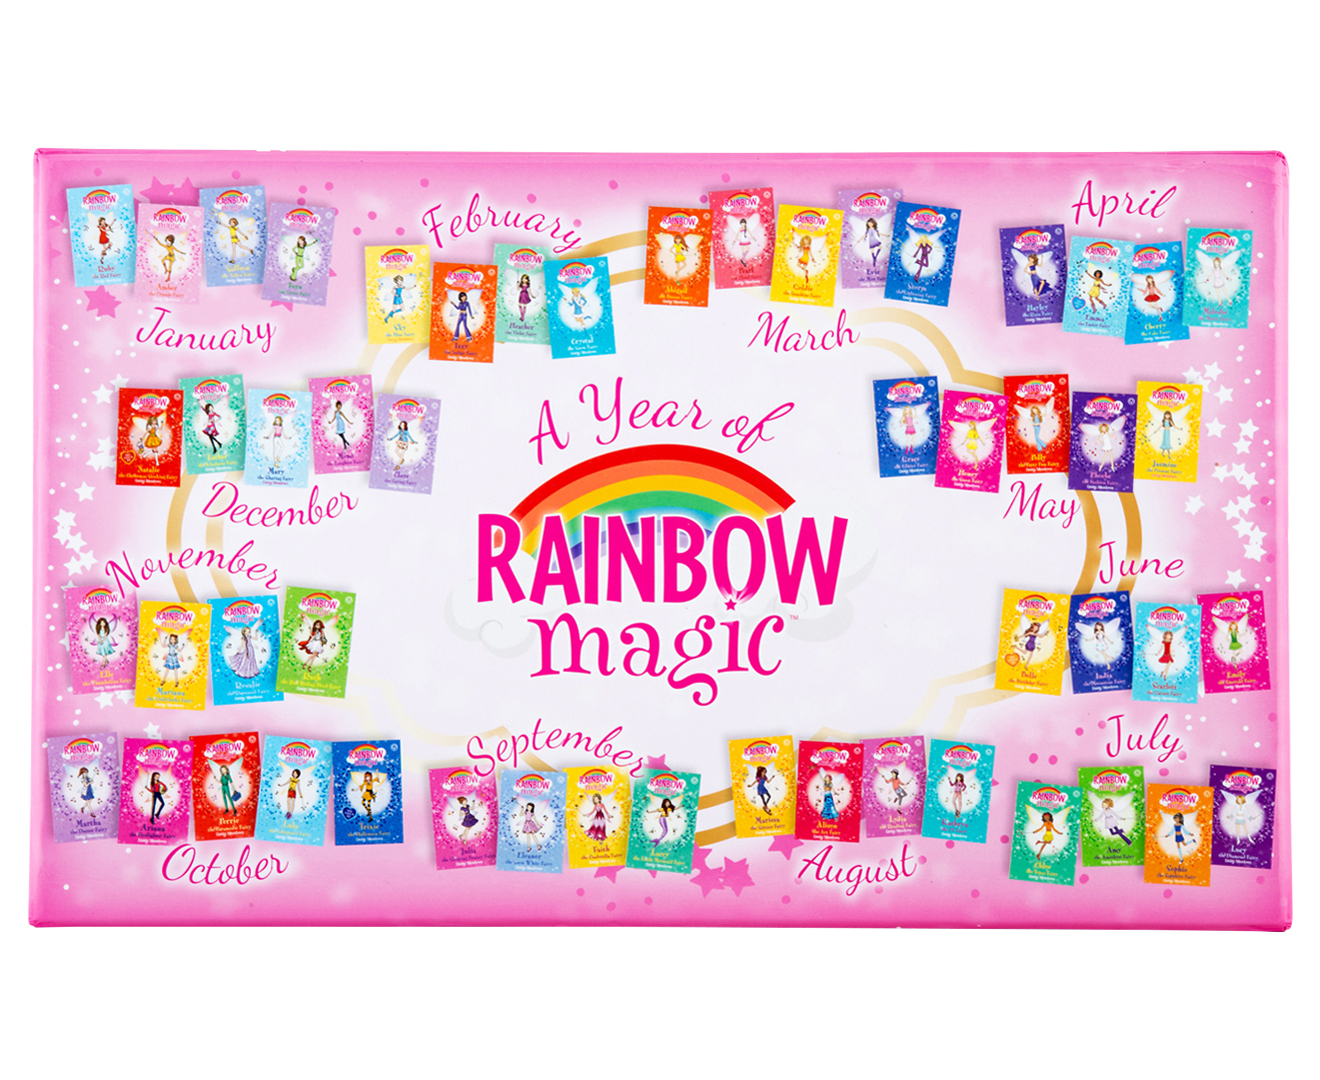 NEW A Year of Rainbow Magic Magical Collection 52 Books Library Kids Gift  Set!